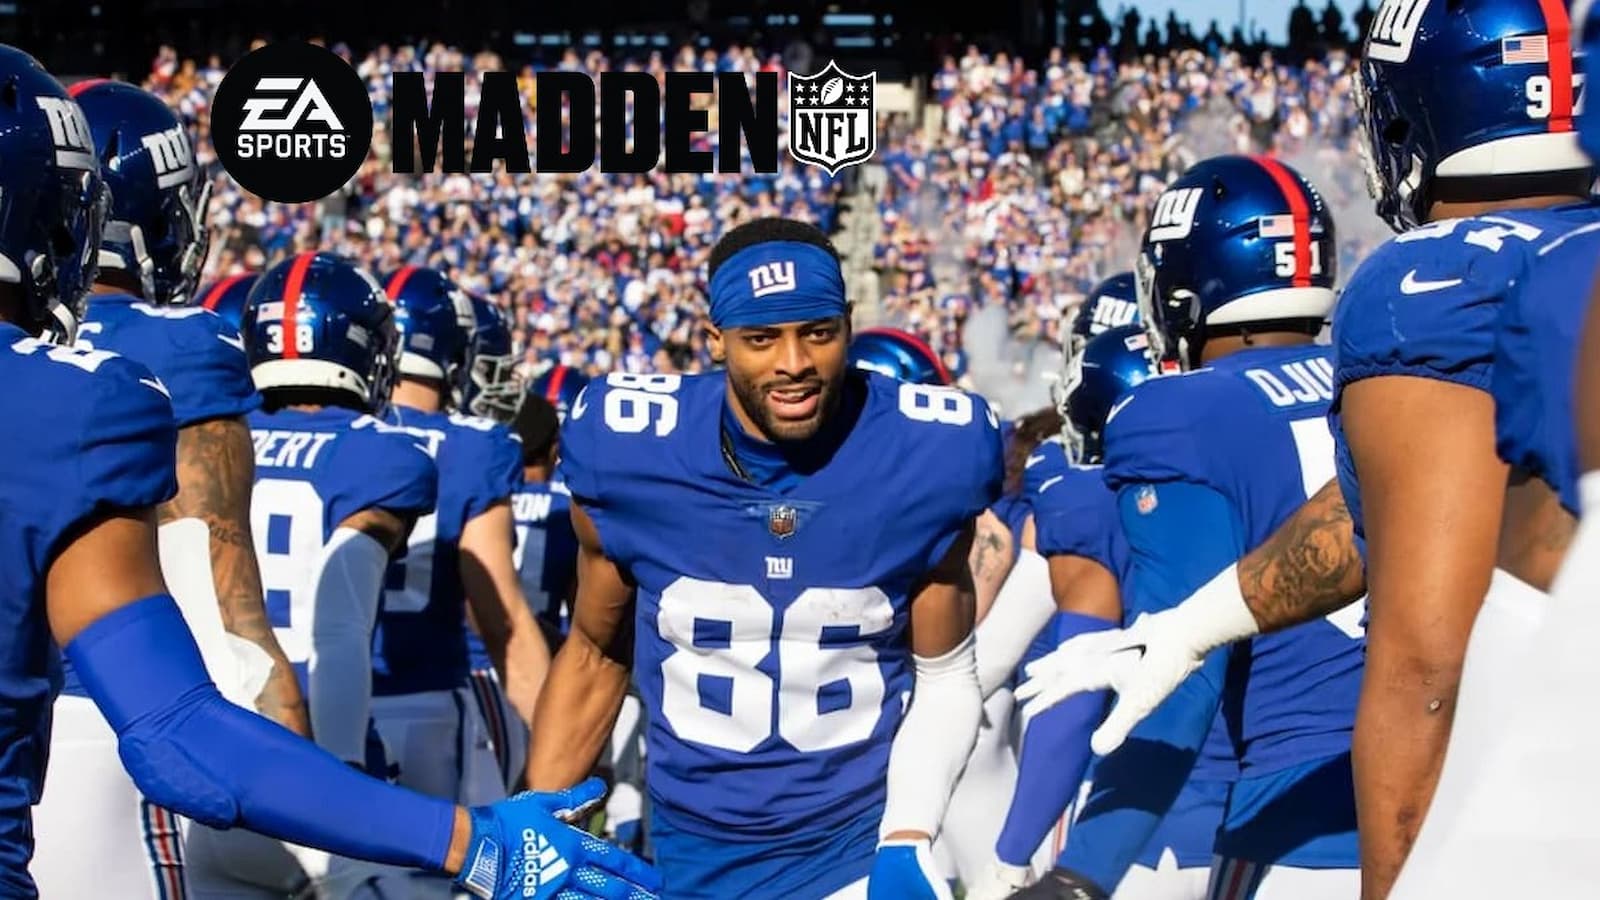 Giants WR tells Madden 24 developers to “count your days” over low